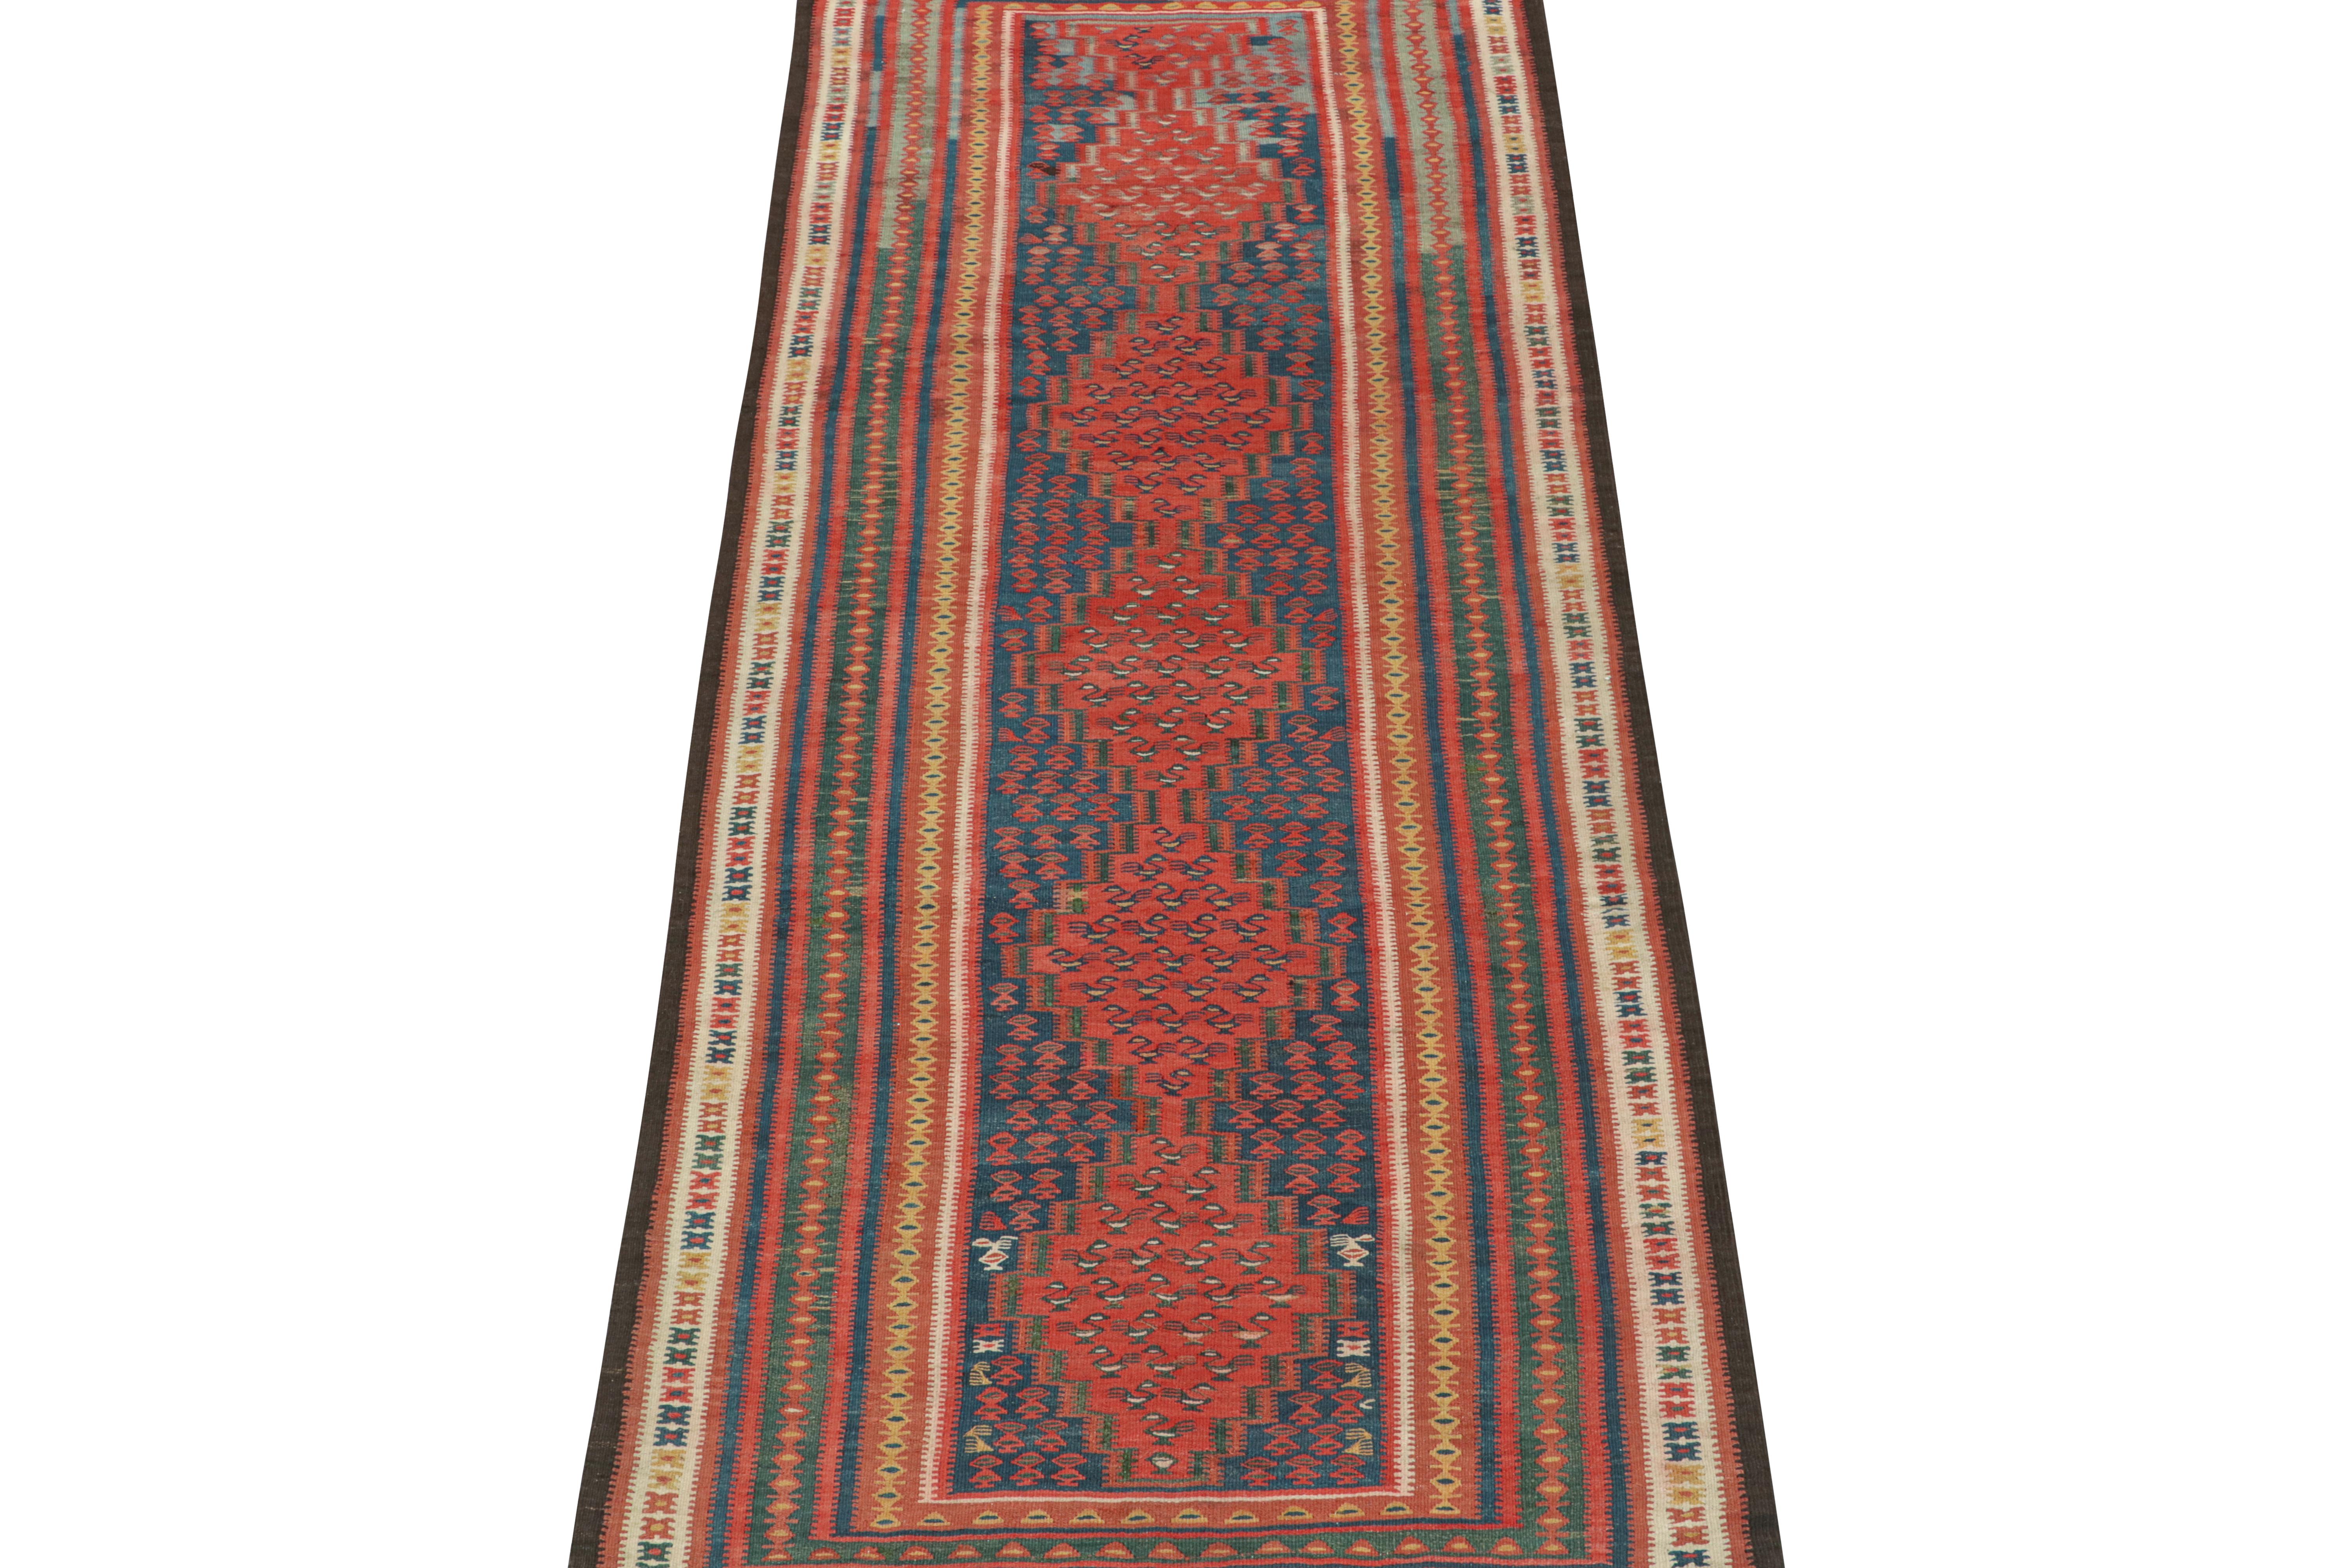 This vintage 4x10 Persian Kilim is believed to be a tribal runner from Harsin in the Kermanshah Province. Handwoven in wool, it originates circa 1950-1960. 

On the Design:

This particular Kilim enjoys an interesting design, playing medallion